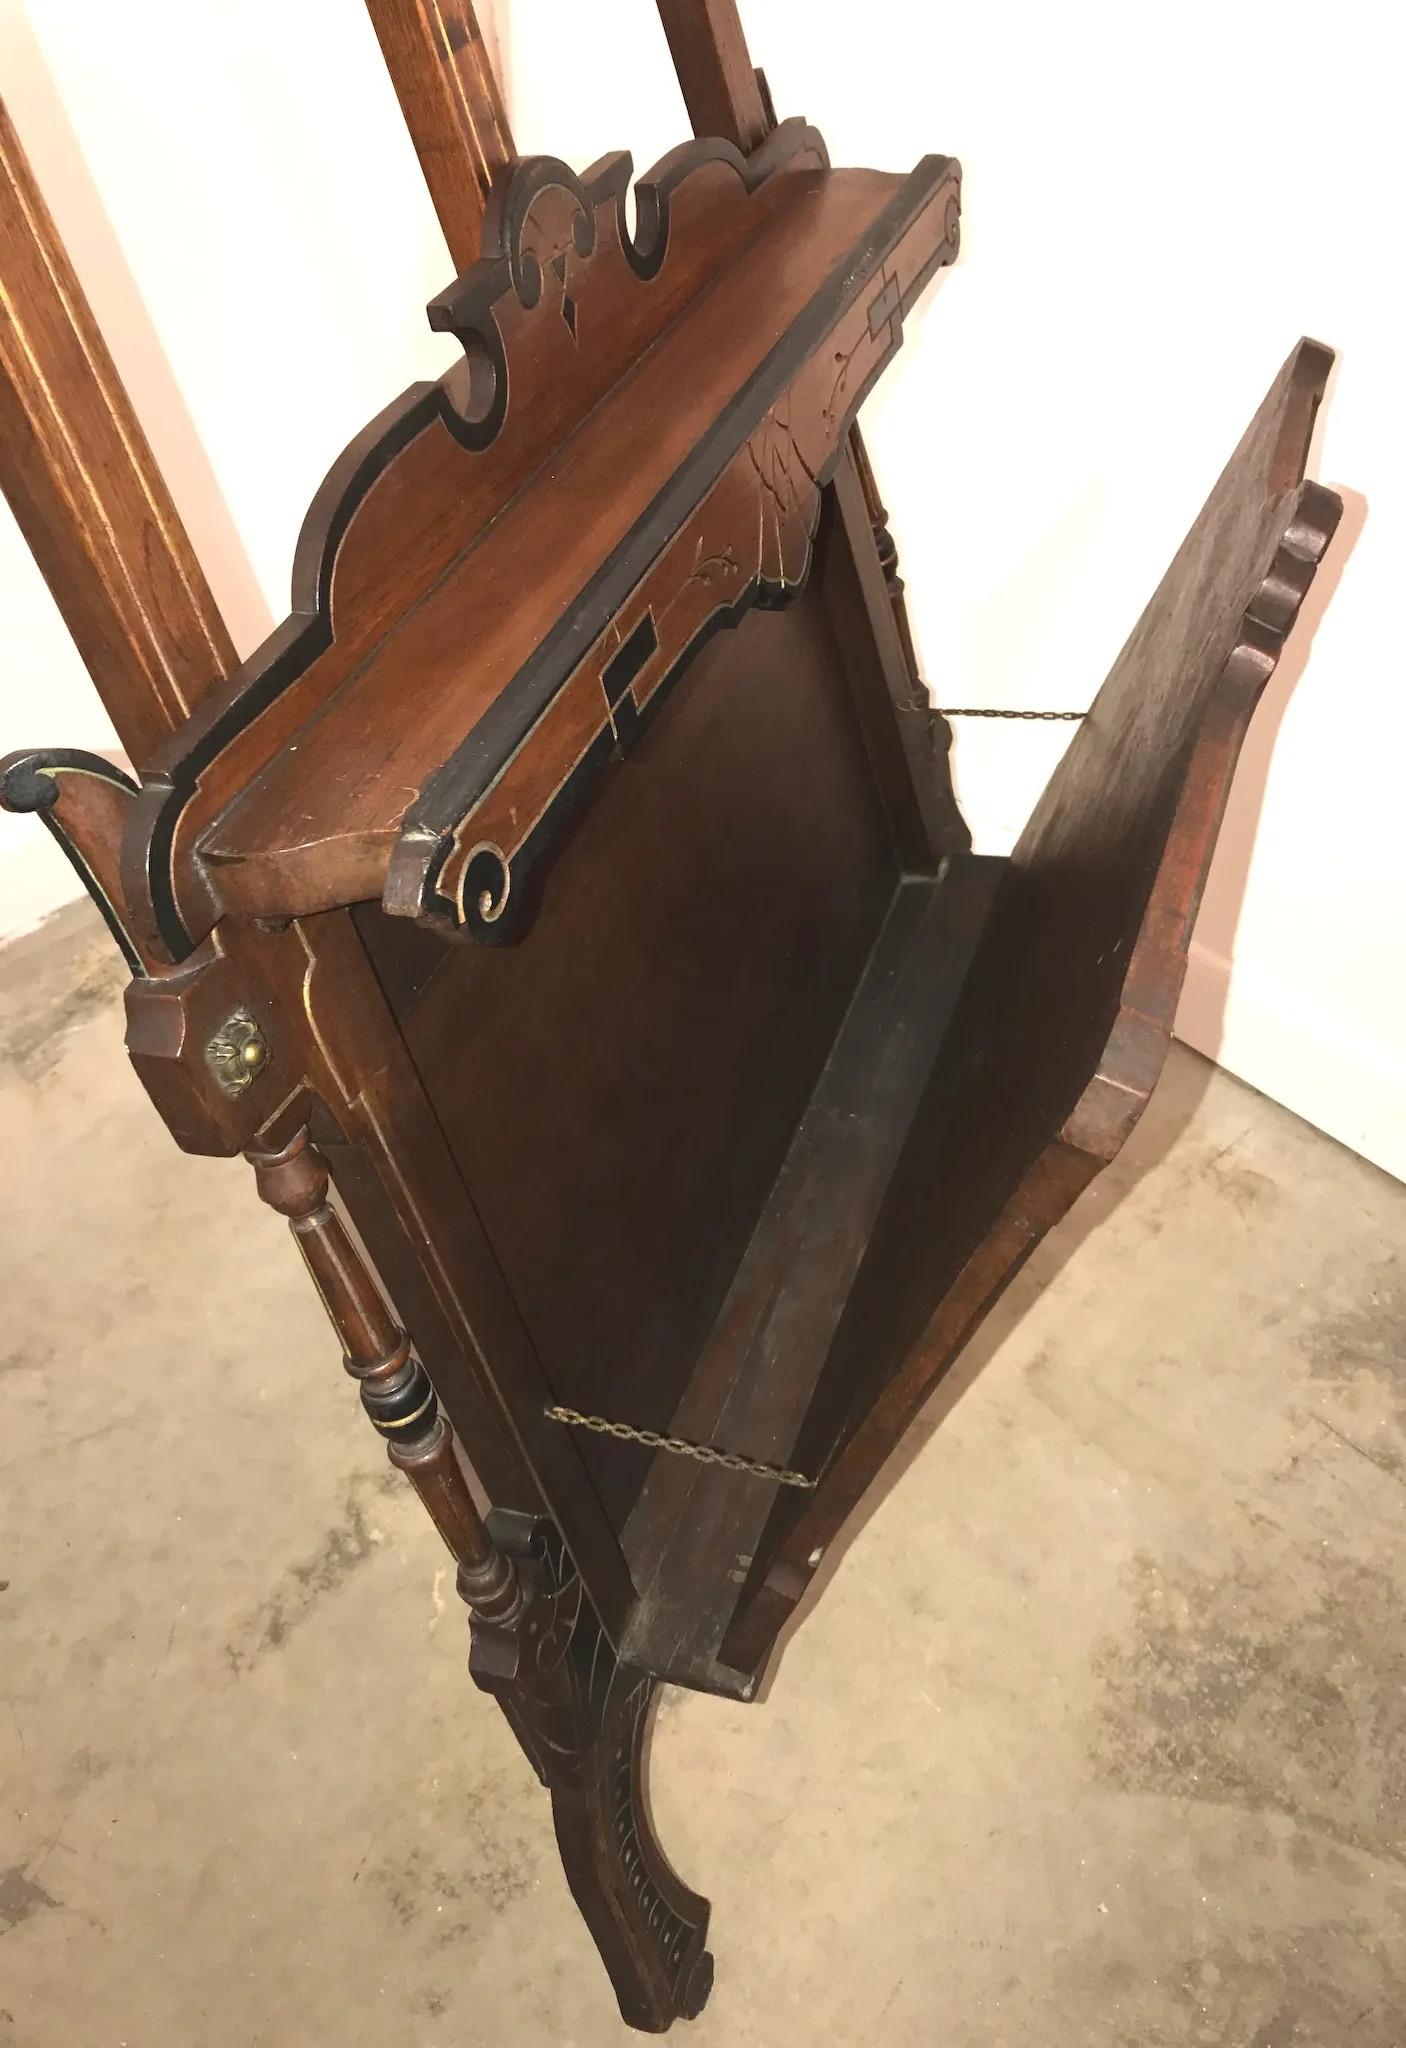 Late 19th Century Aesthetic Period Painting and Portfolio Easel, circa 1880